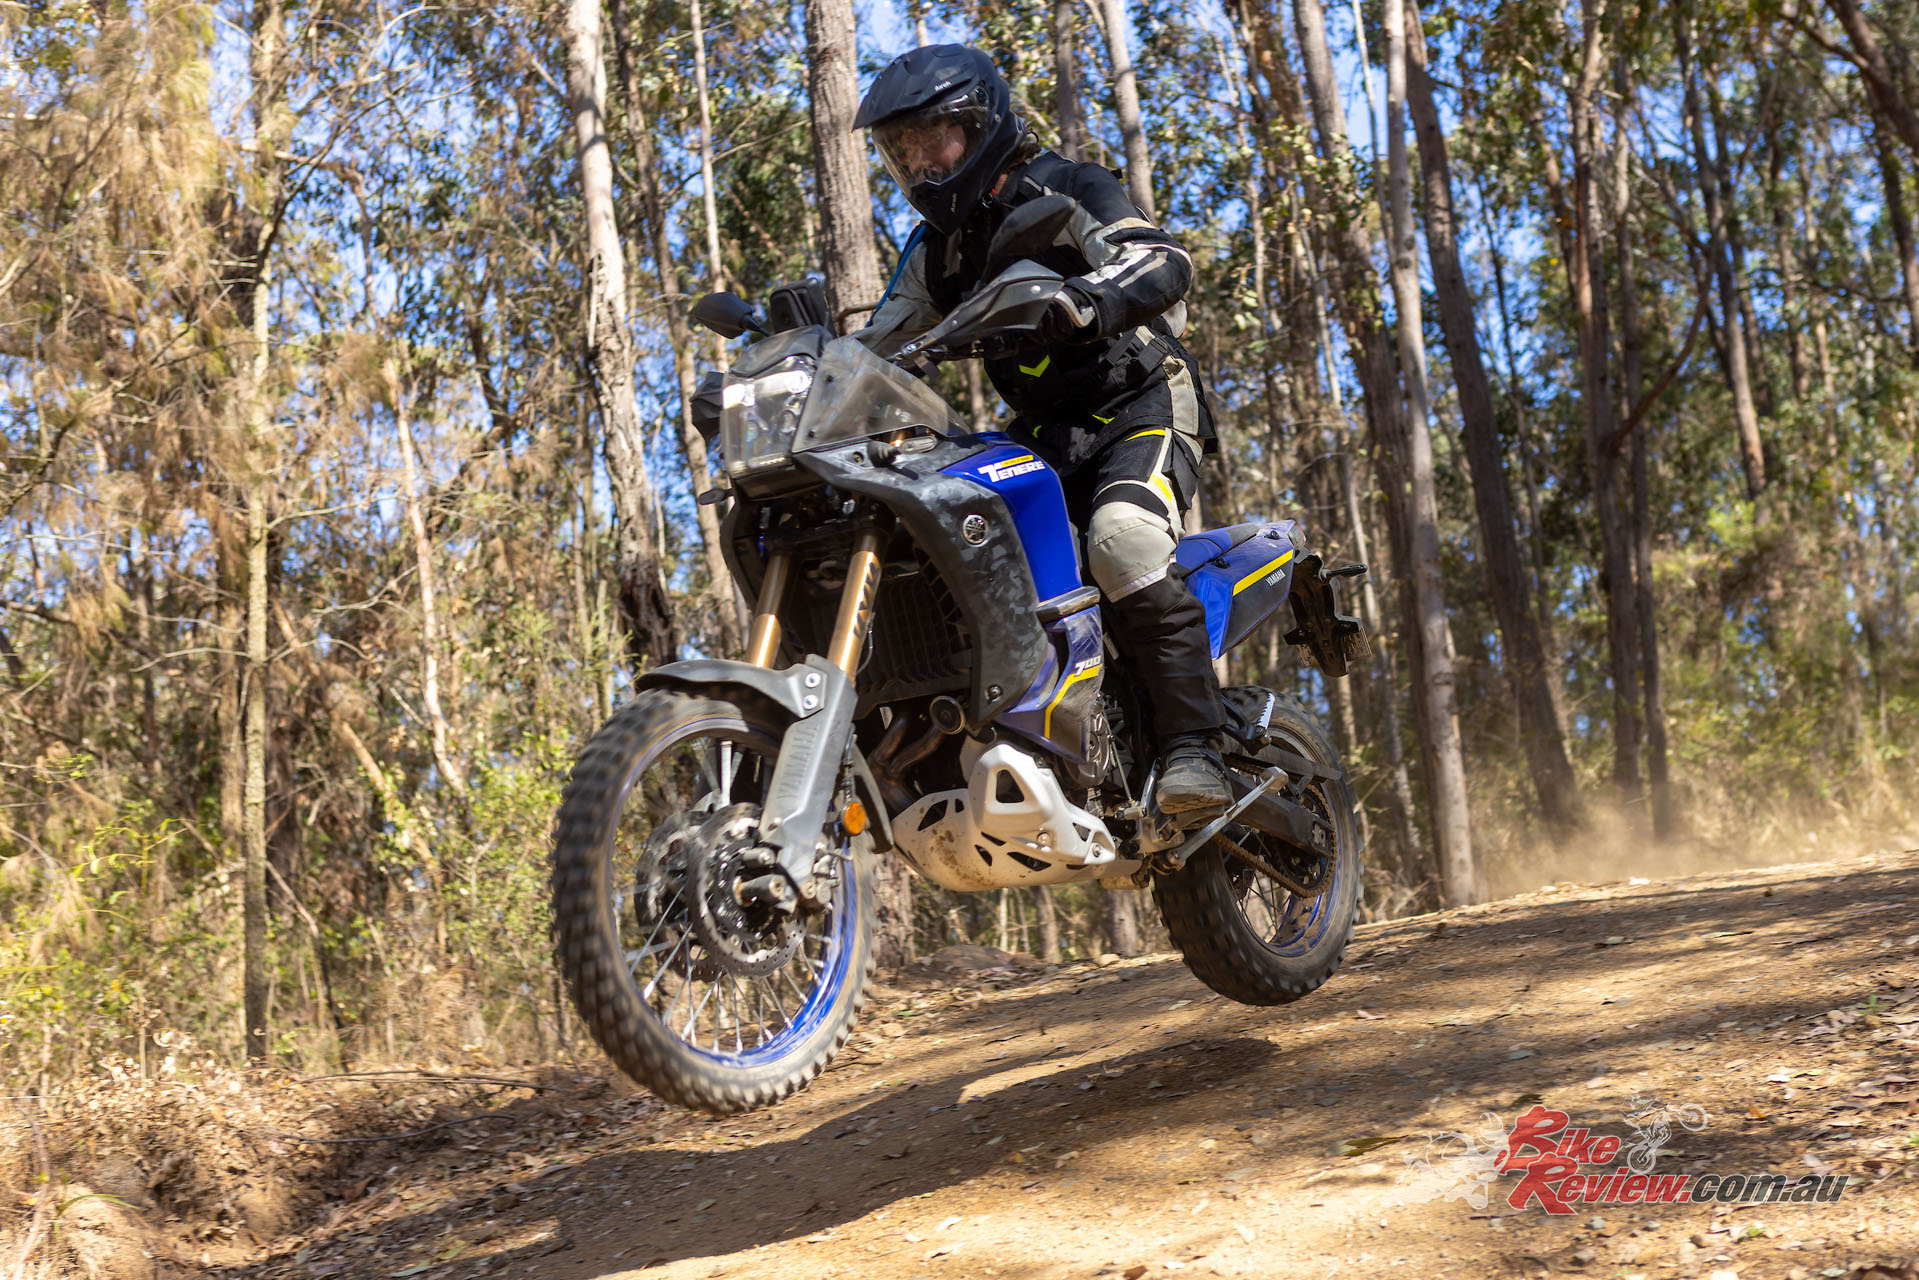 The Ténéré 700 World Raid absolutely ate up some of those prime NSW trails.